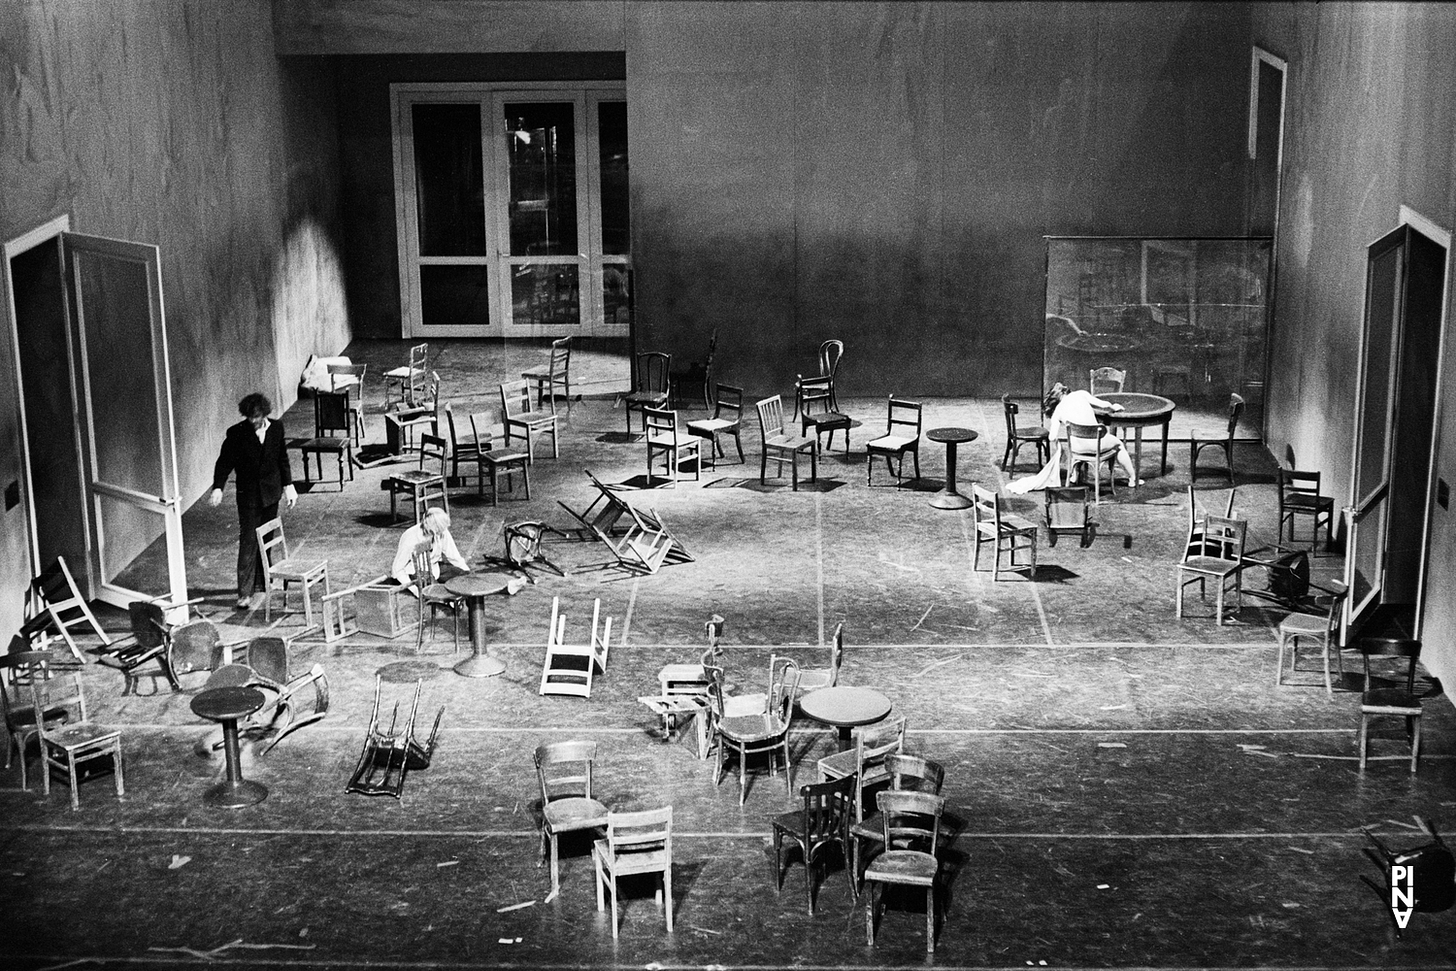 A photograph of a theatre stage scattered with chairs.